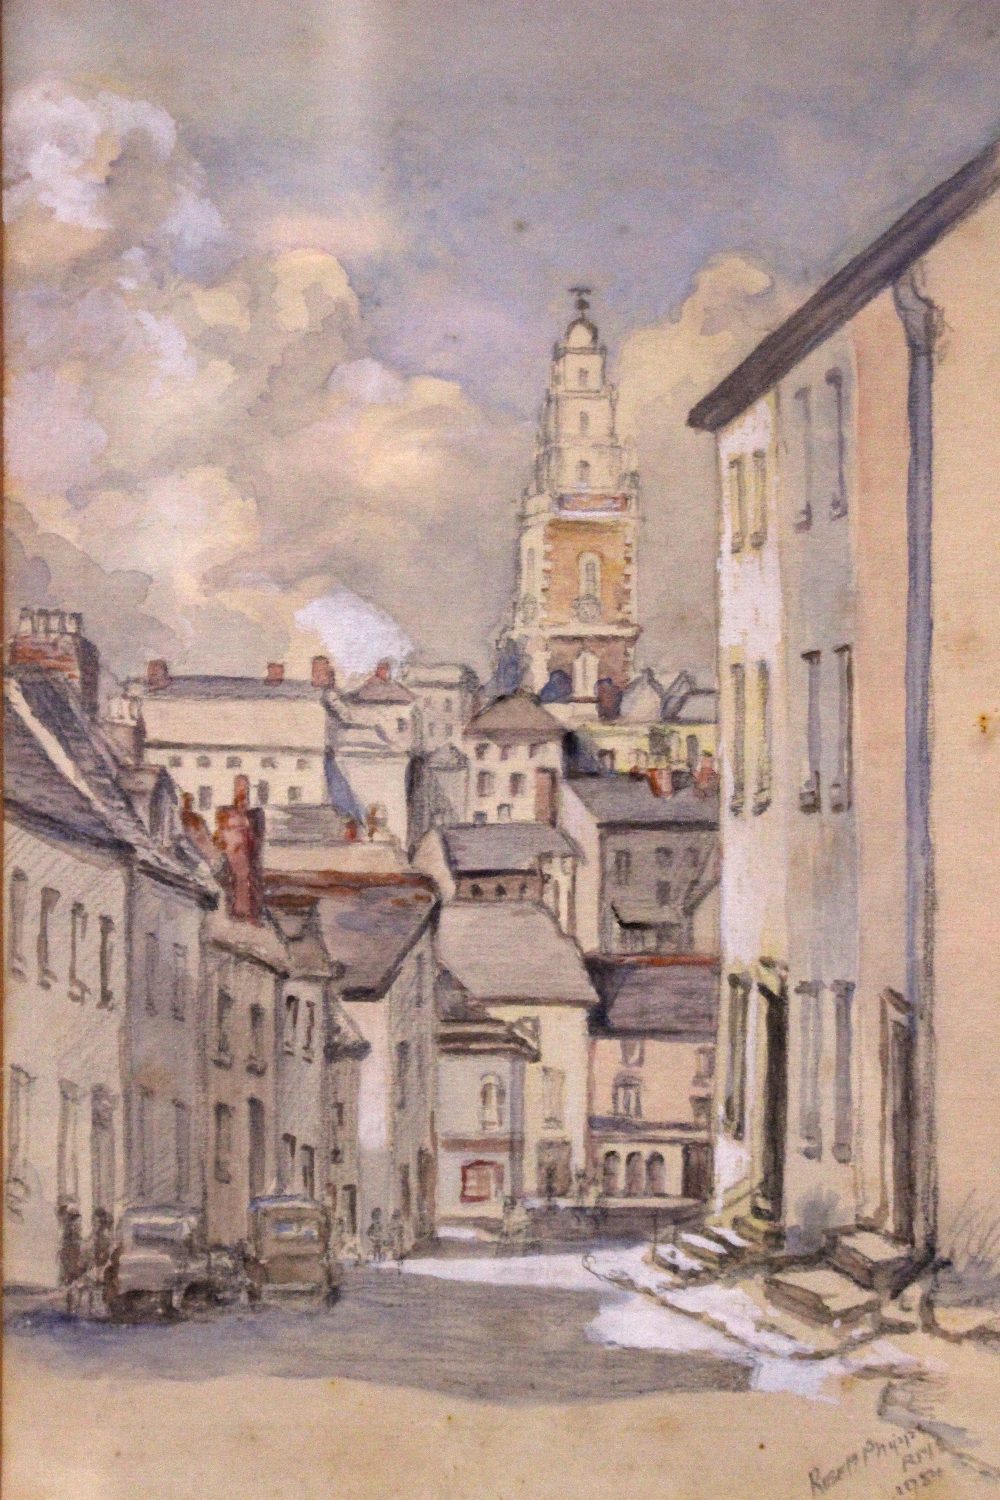 ROSE M. PHIPPS, "CORK CITY STREET, WITH SHANDON BELLS BEYOND", watercolour over pencil on paper, - Image 2 of 3